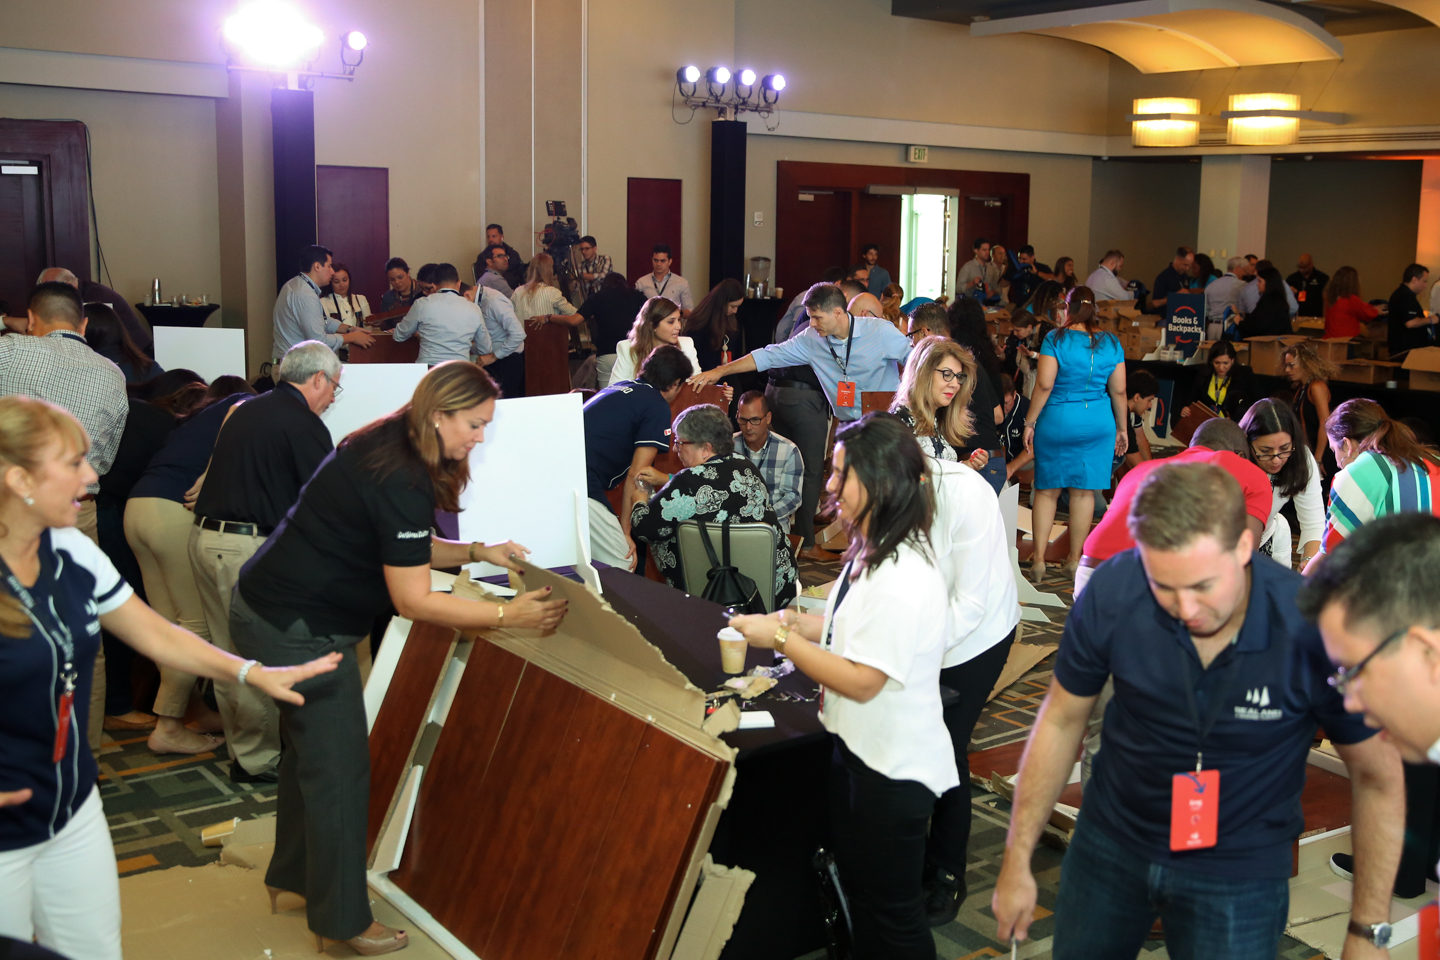 Professional-Event-Photography-Orlando-Sealand-annual-conference-Puerto-Rico-28.jpg